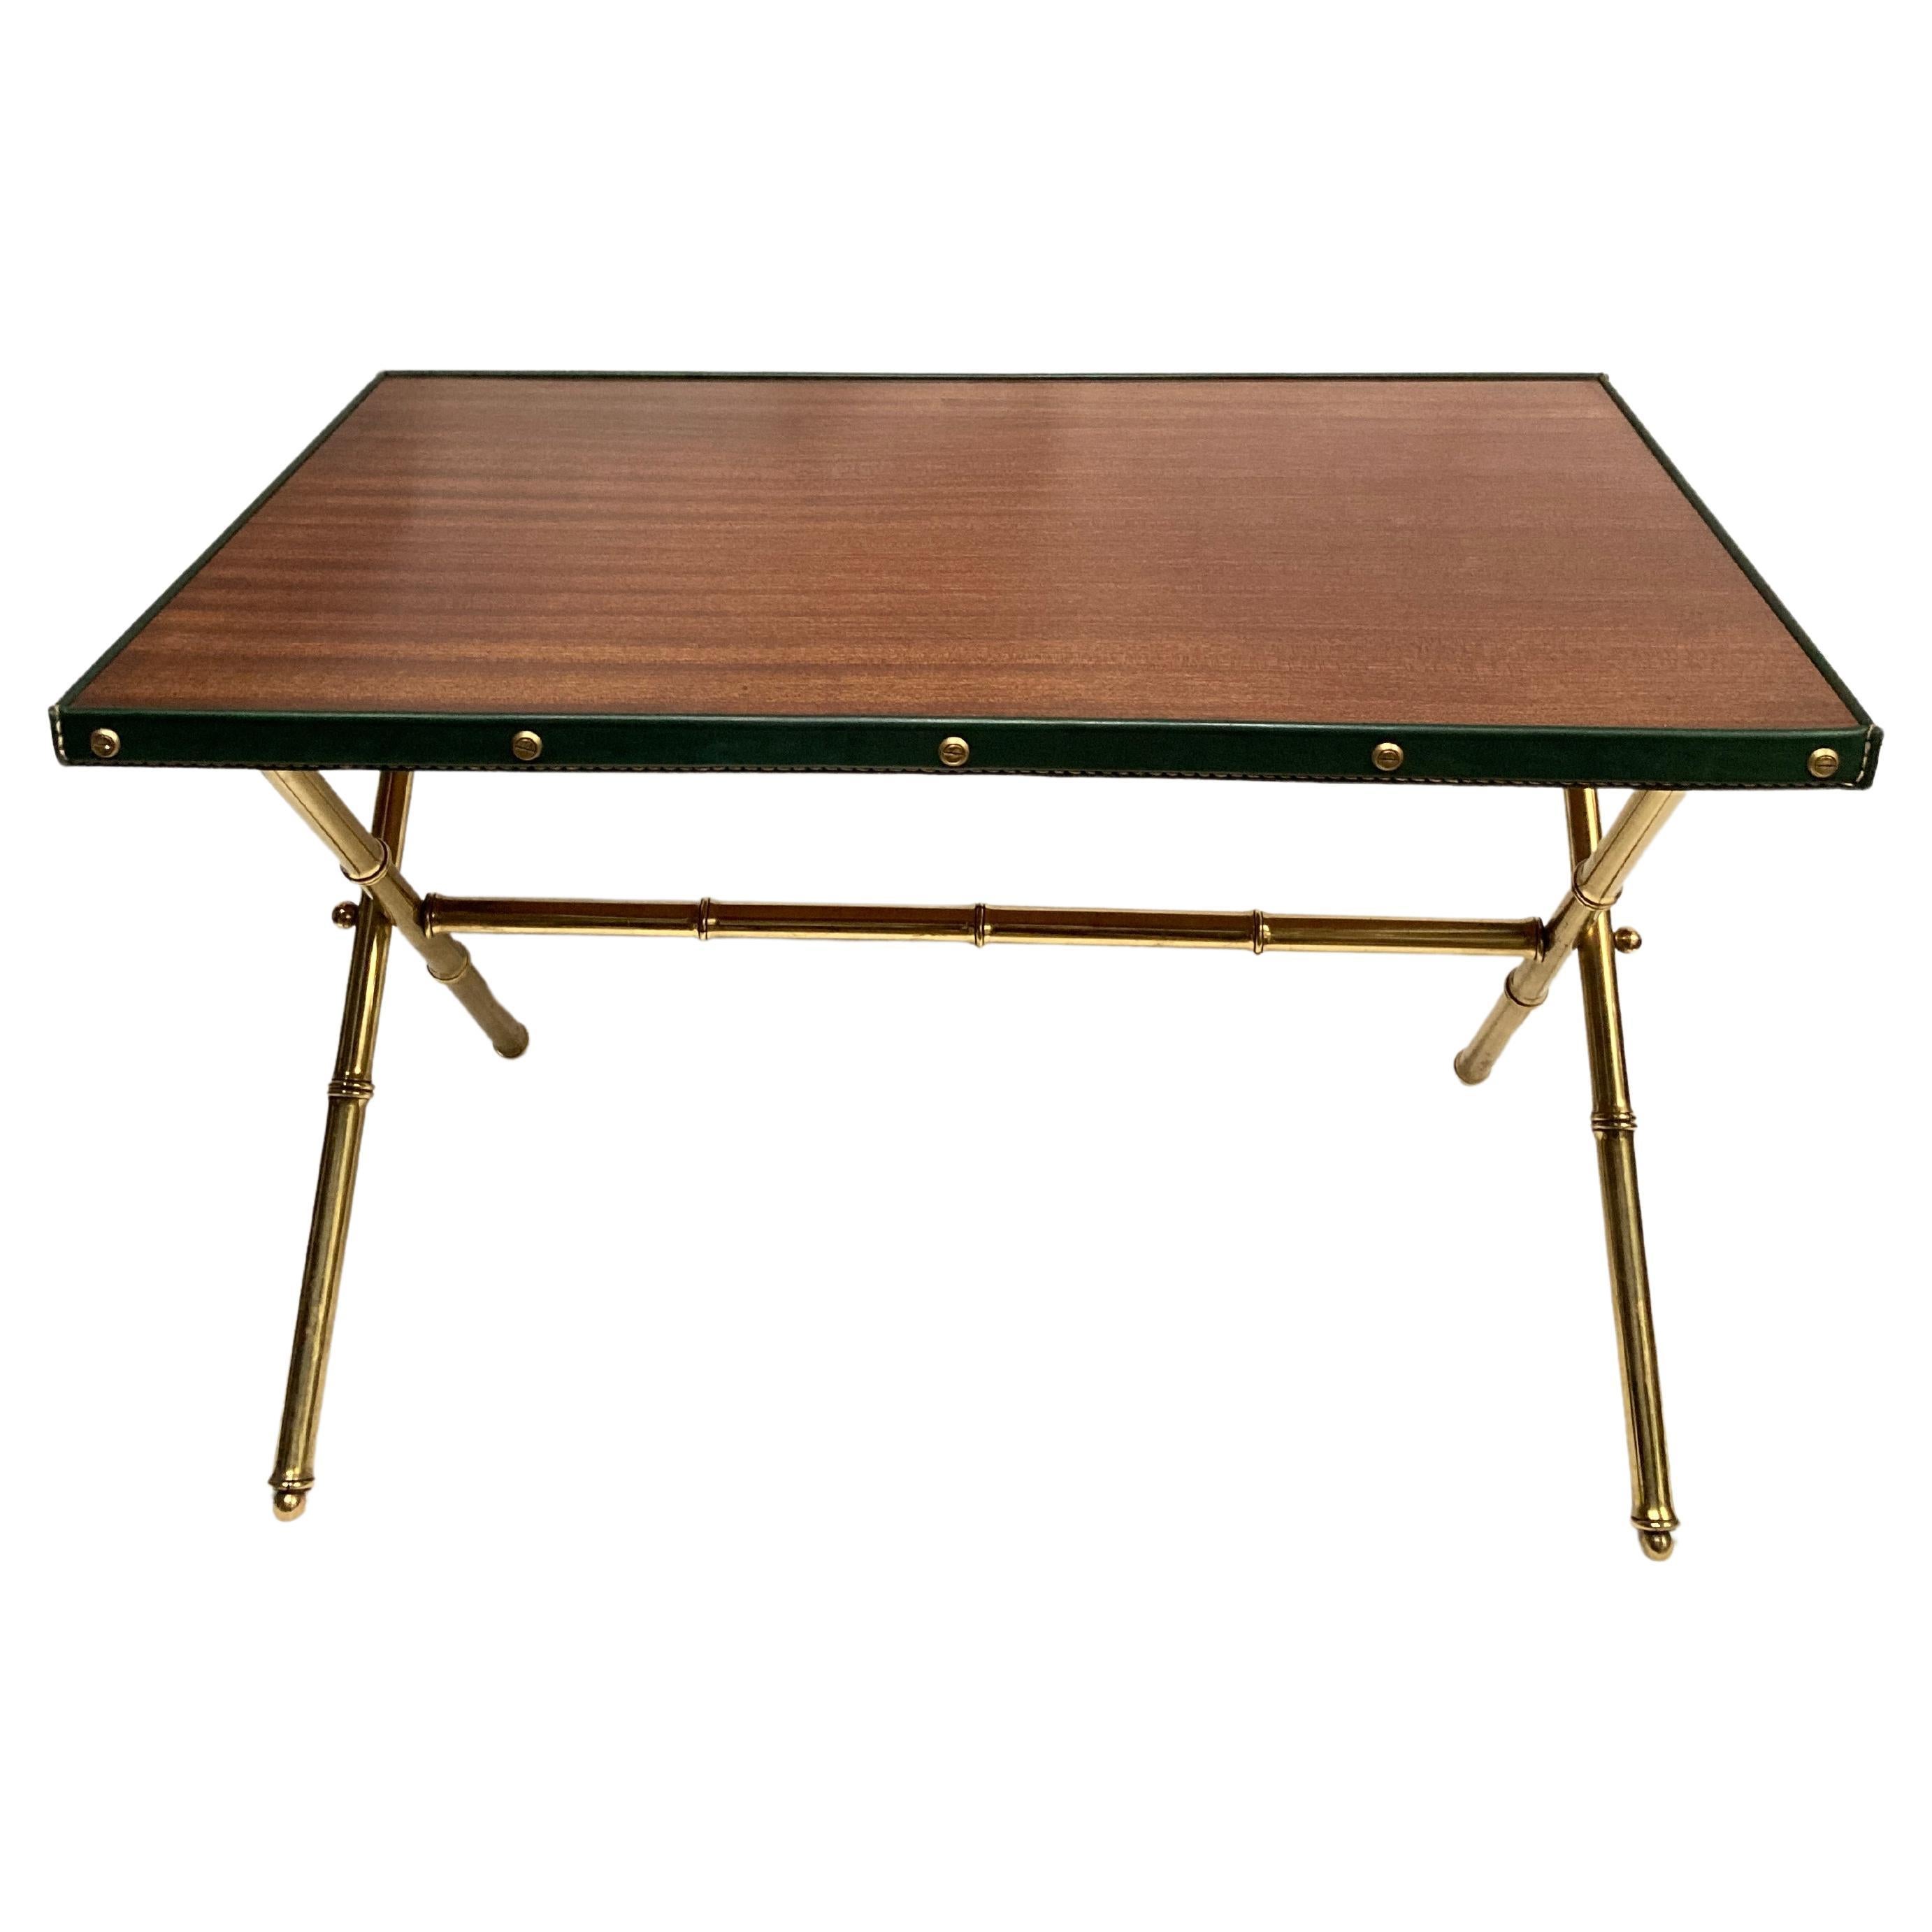 1950's Stitched leather cocktail table by Jacques Adnet For Sale